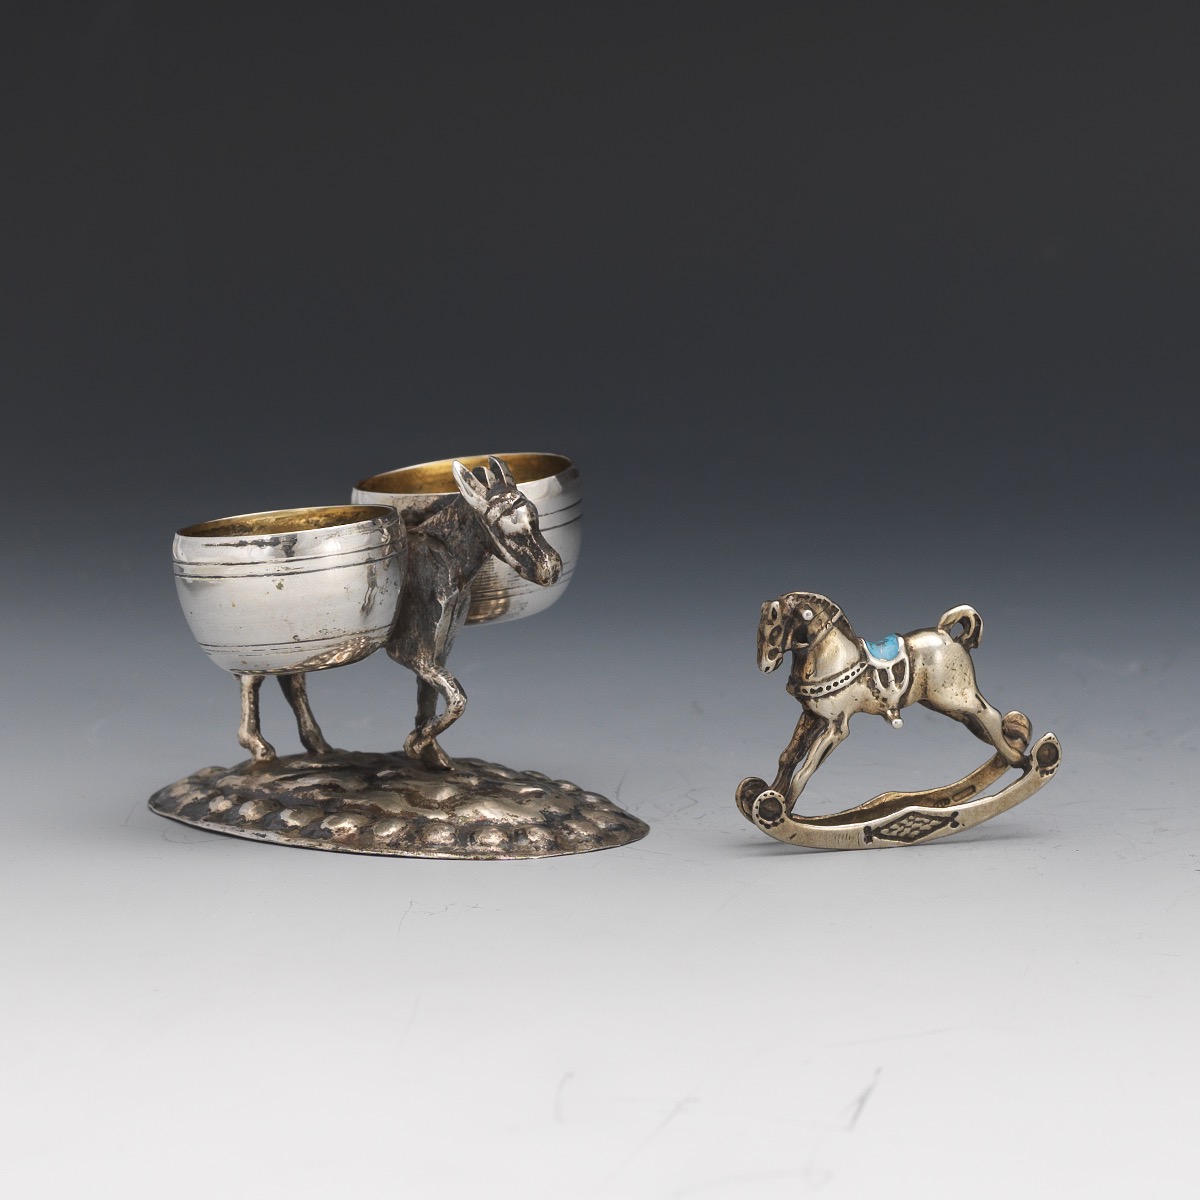 Italian Silver, Gold Wash and Enamel Donkey Salt/Pepper Cellar and Baby Rocking Horse